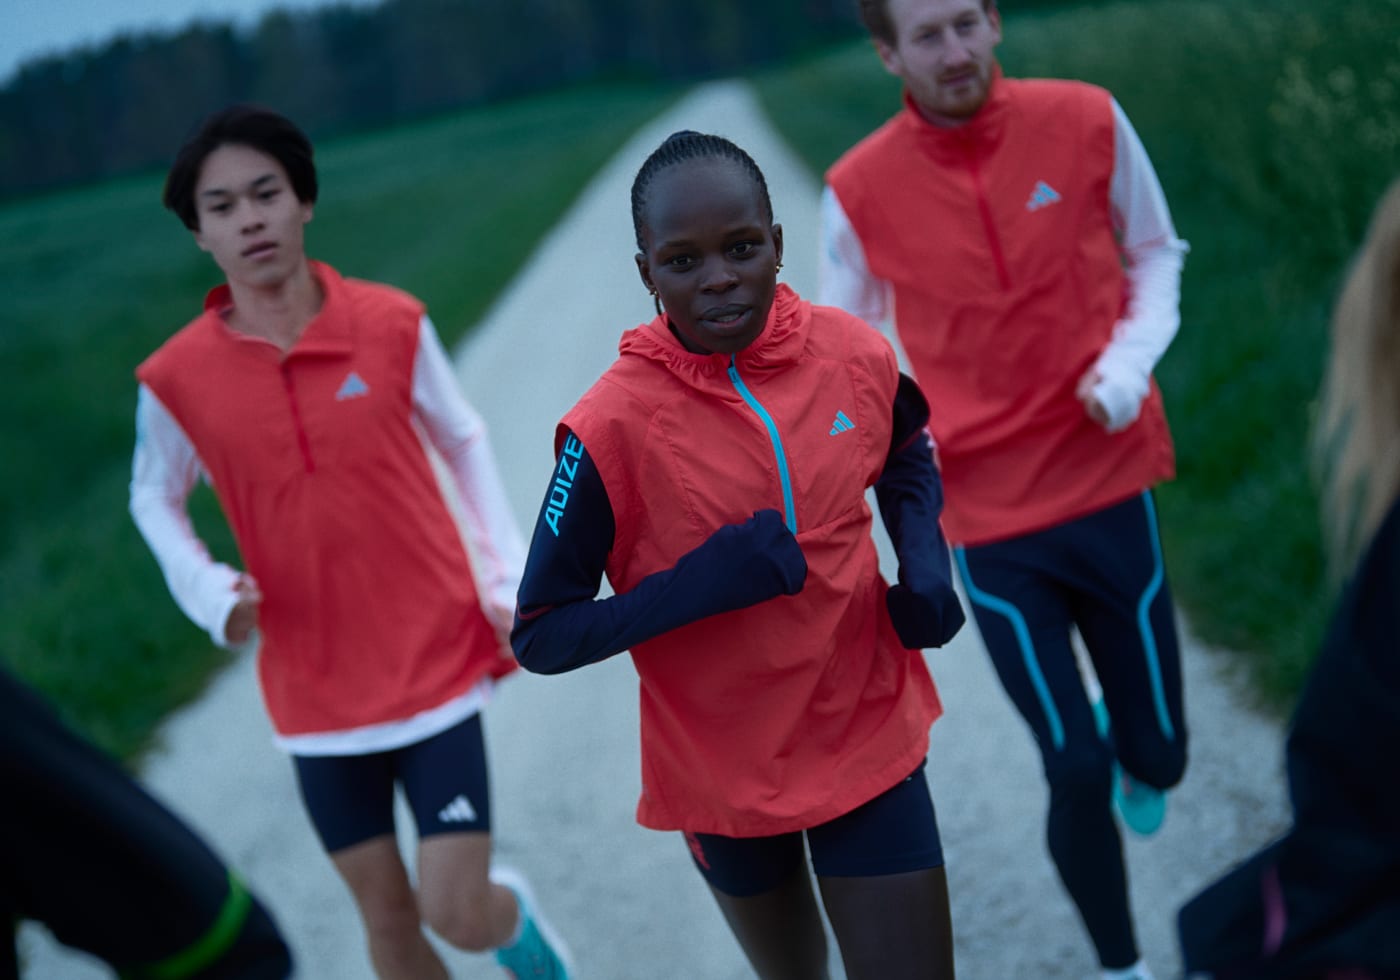 Peres Jepchirchir and other female runners running outside wearing Adizero running apparel, red vests and dark shorts